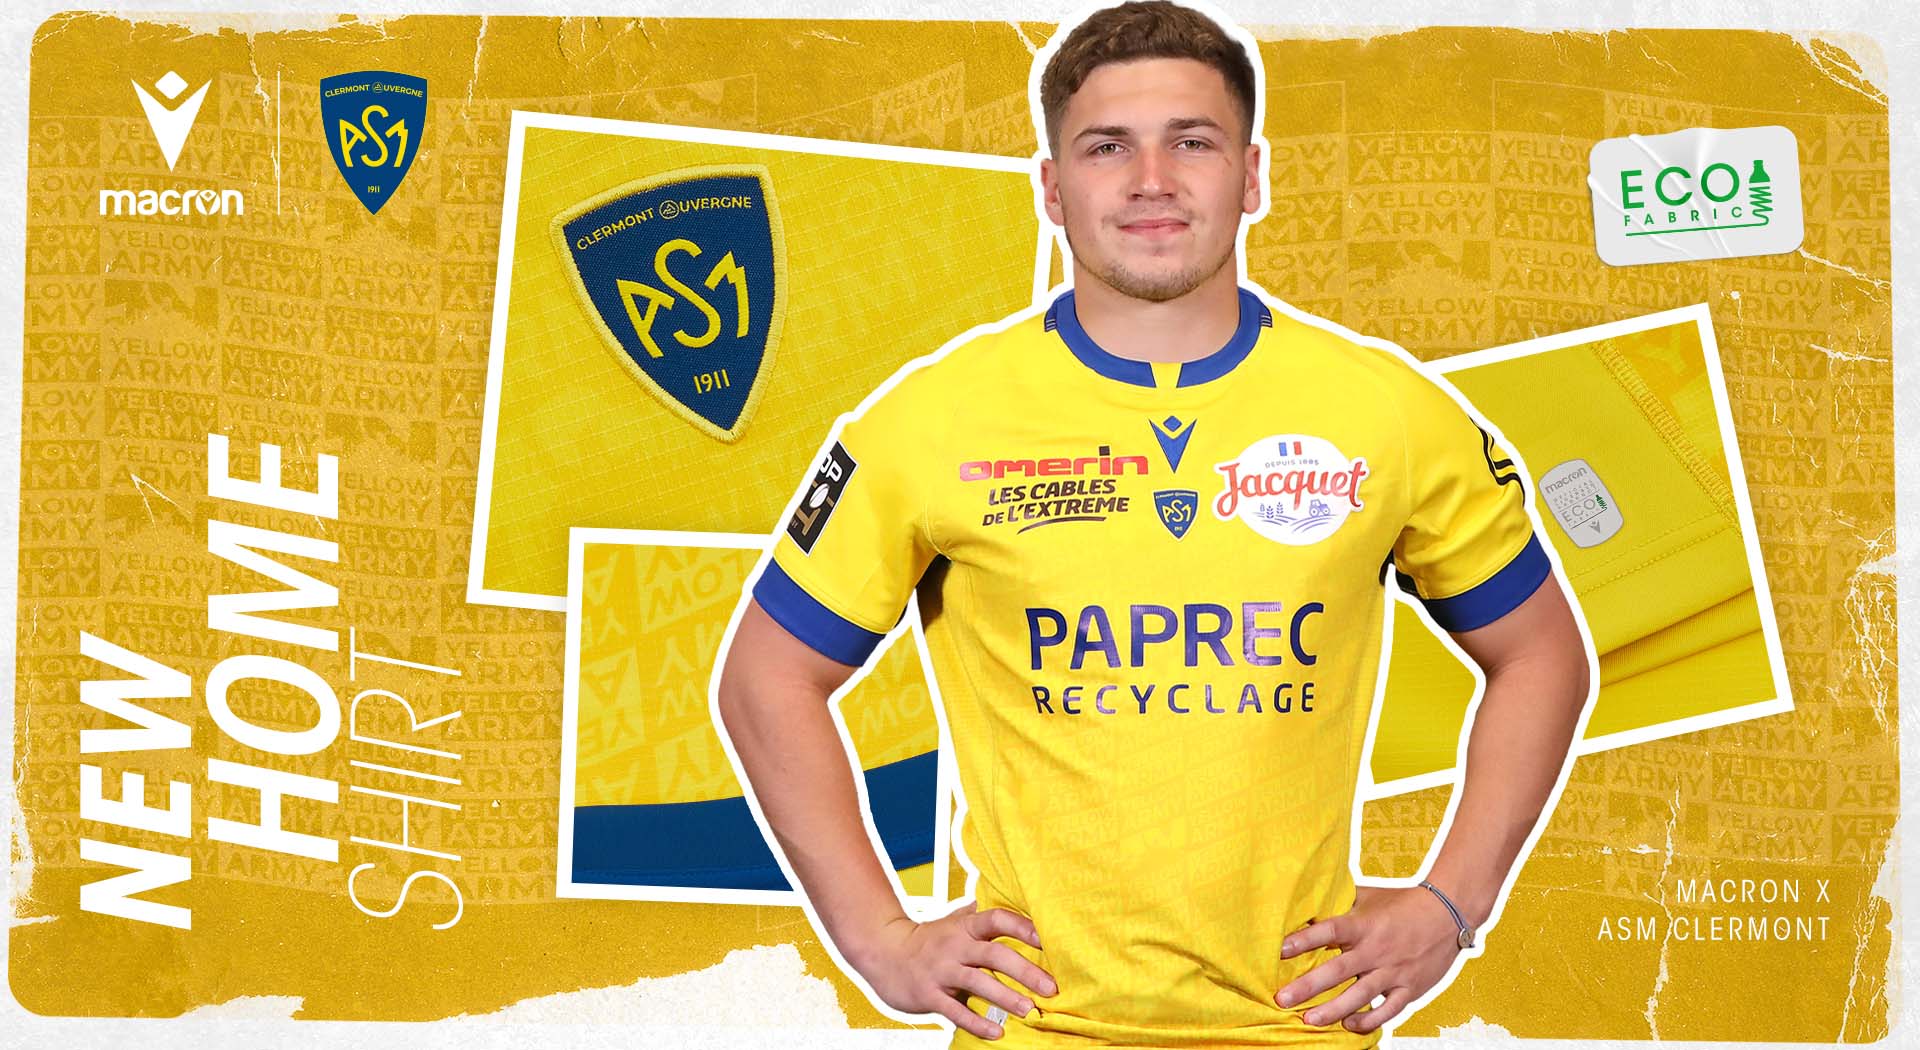 Macron ASM Clermont Auvergne and Macron announce renewal with a new Home jersey dedicated to the Yellow Army | Bild 1